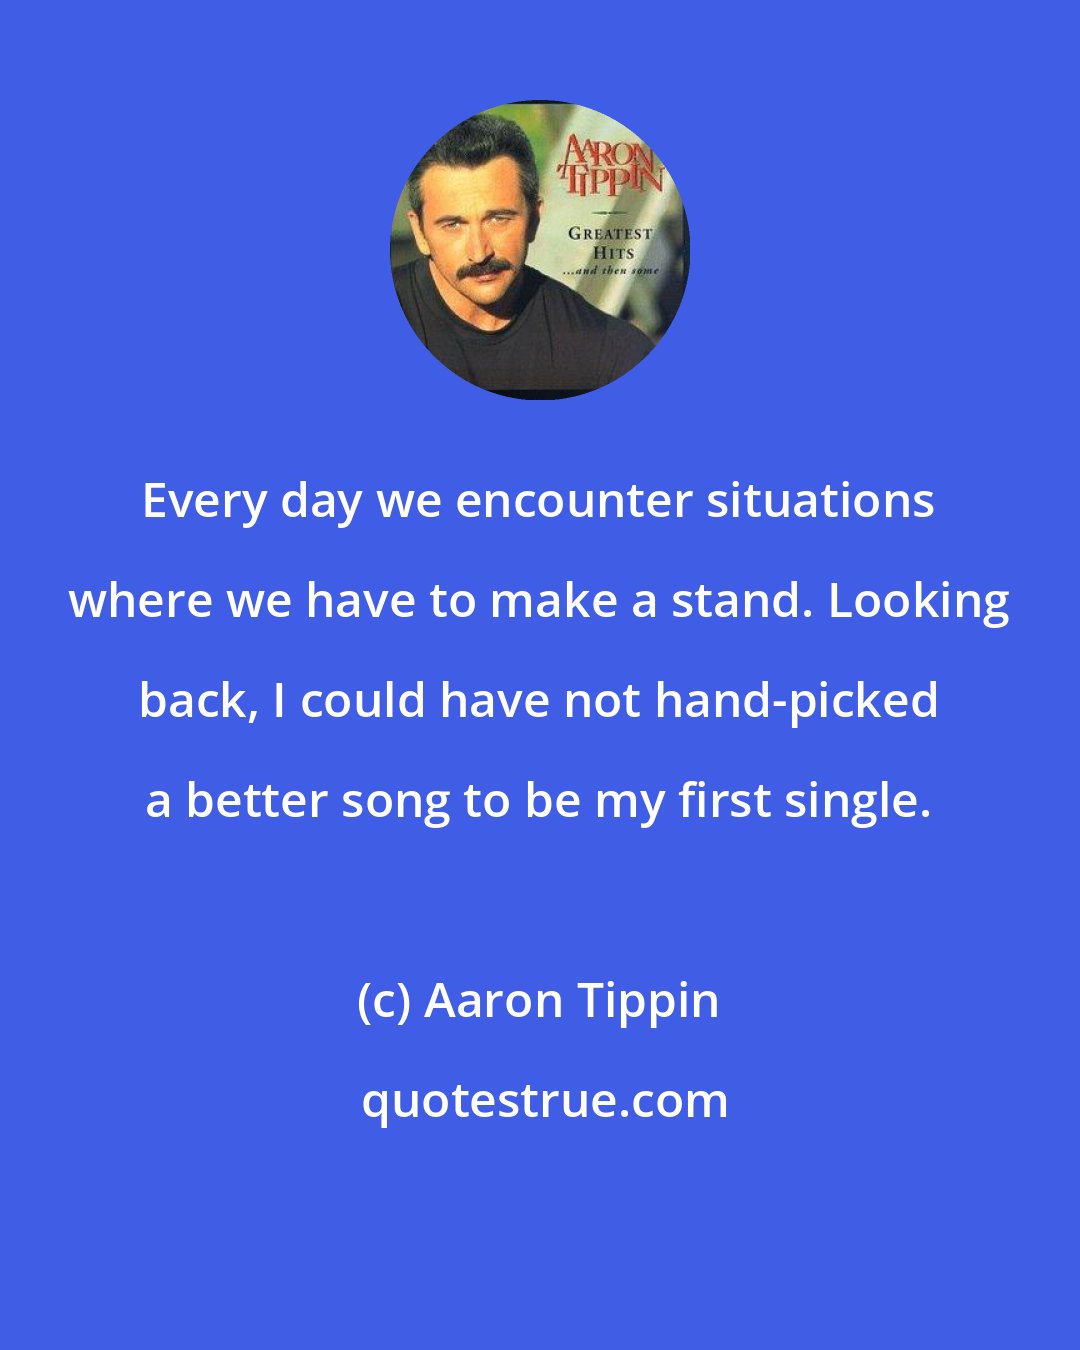 Aaron Tippin: Every day we encounter situations where we have to make a stand. Looking back, I could have not hand-picked a better song to be my first single.